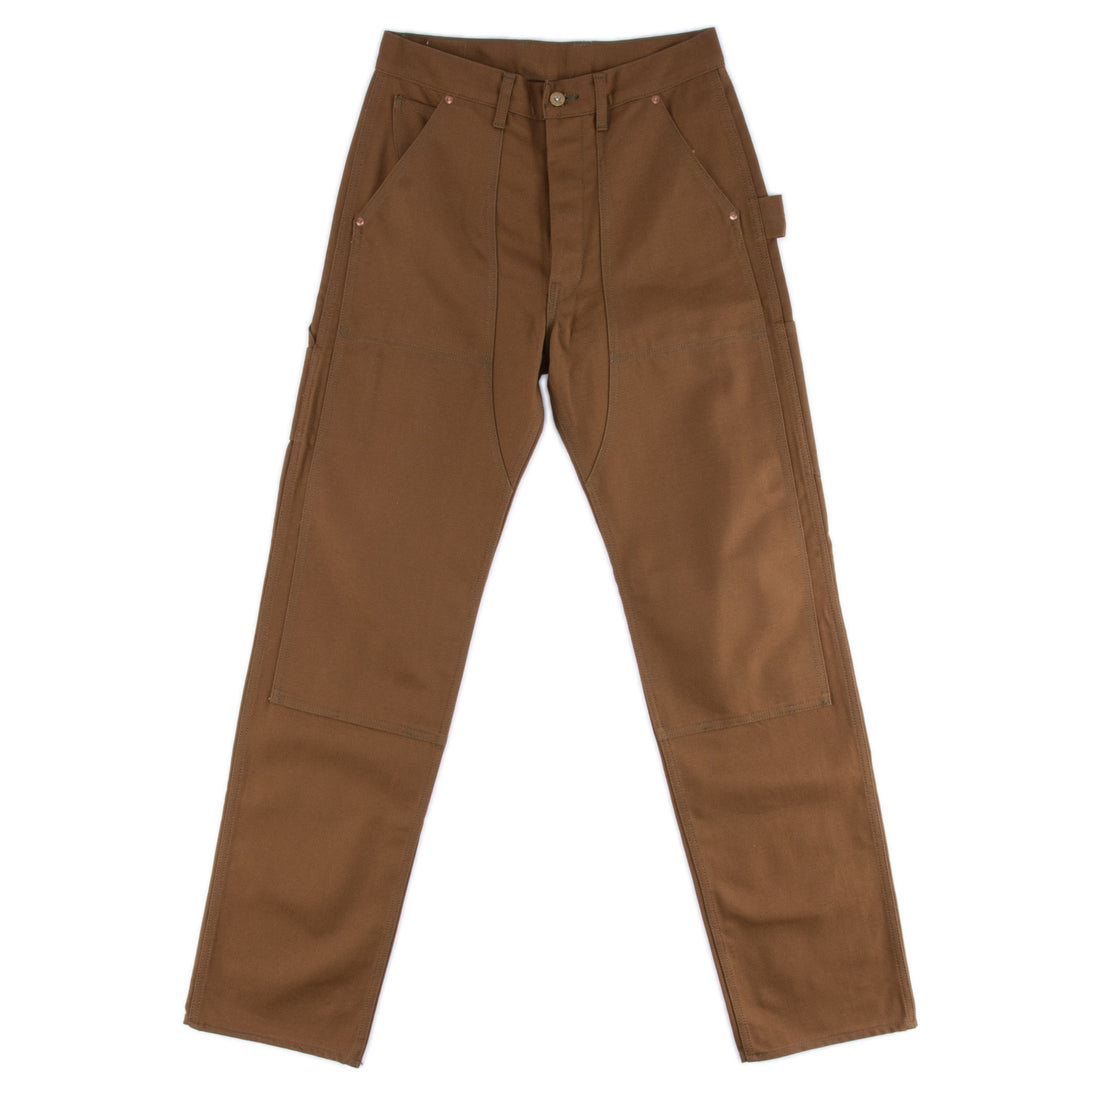 The Real McCoy's 8 Hour Union Brown Canvas Double Knee Trouser - Standard & Strange